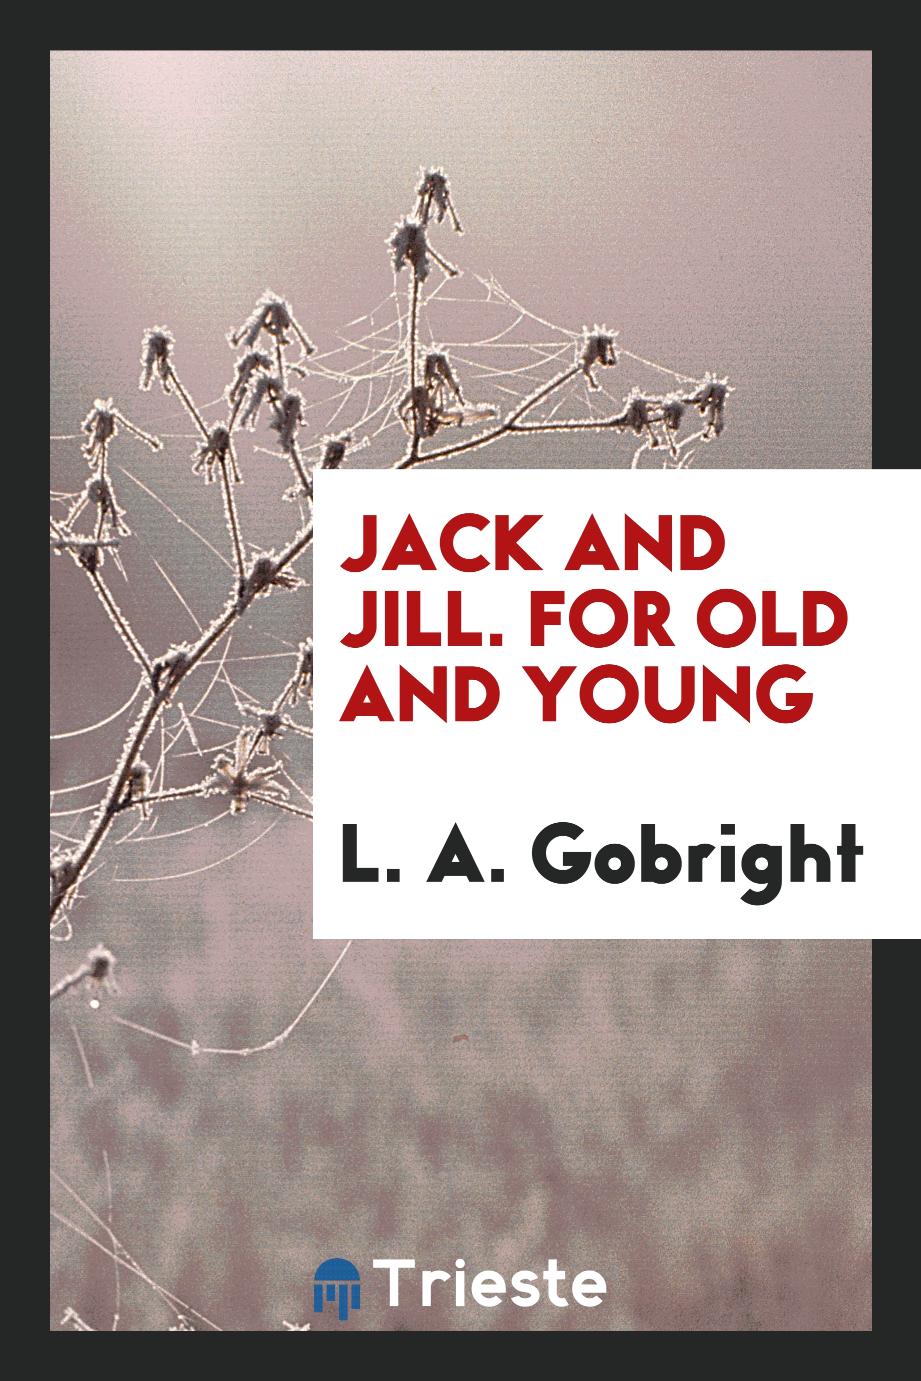 Jack and Jill. For old and young